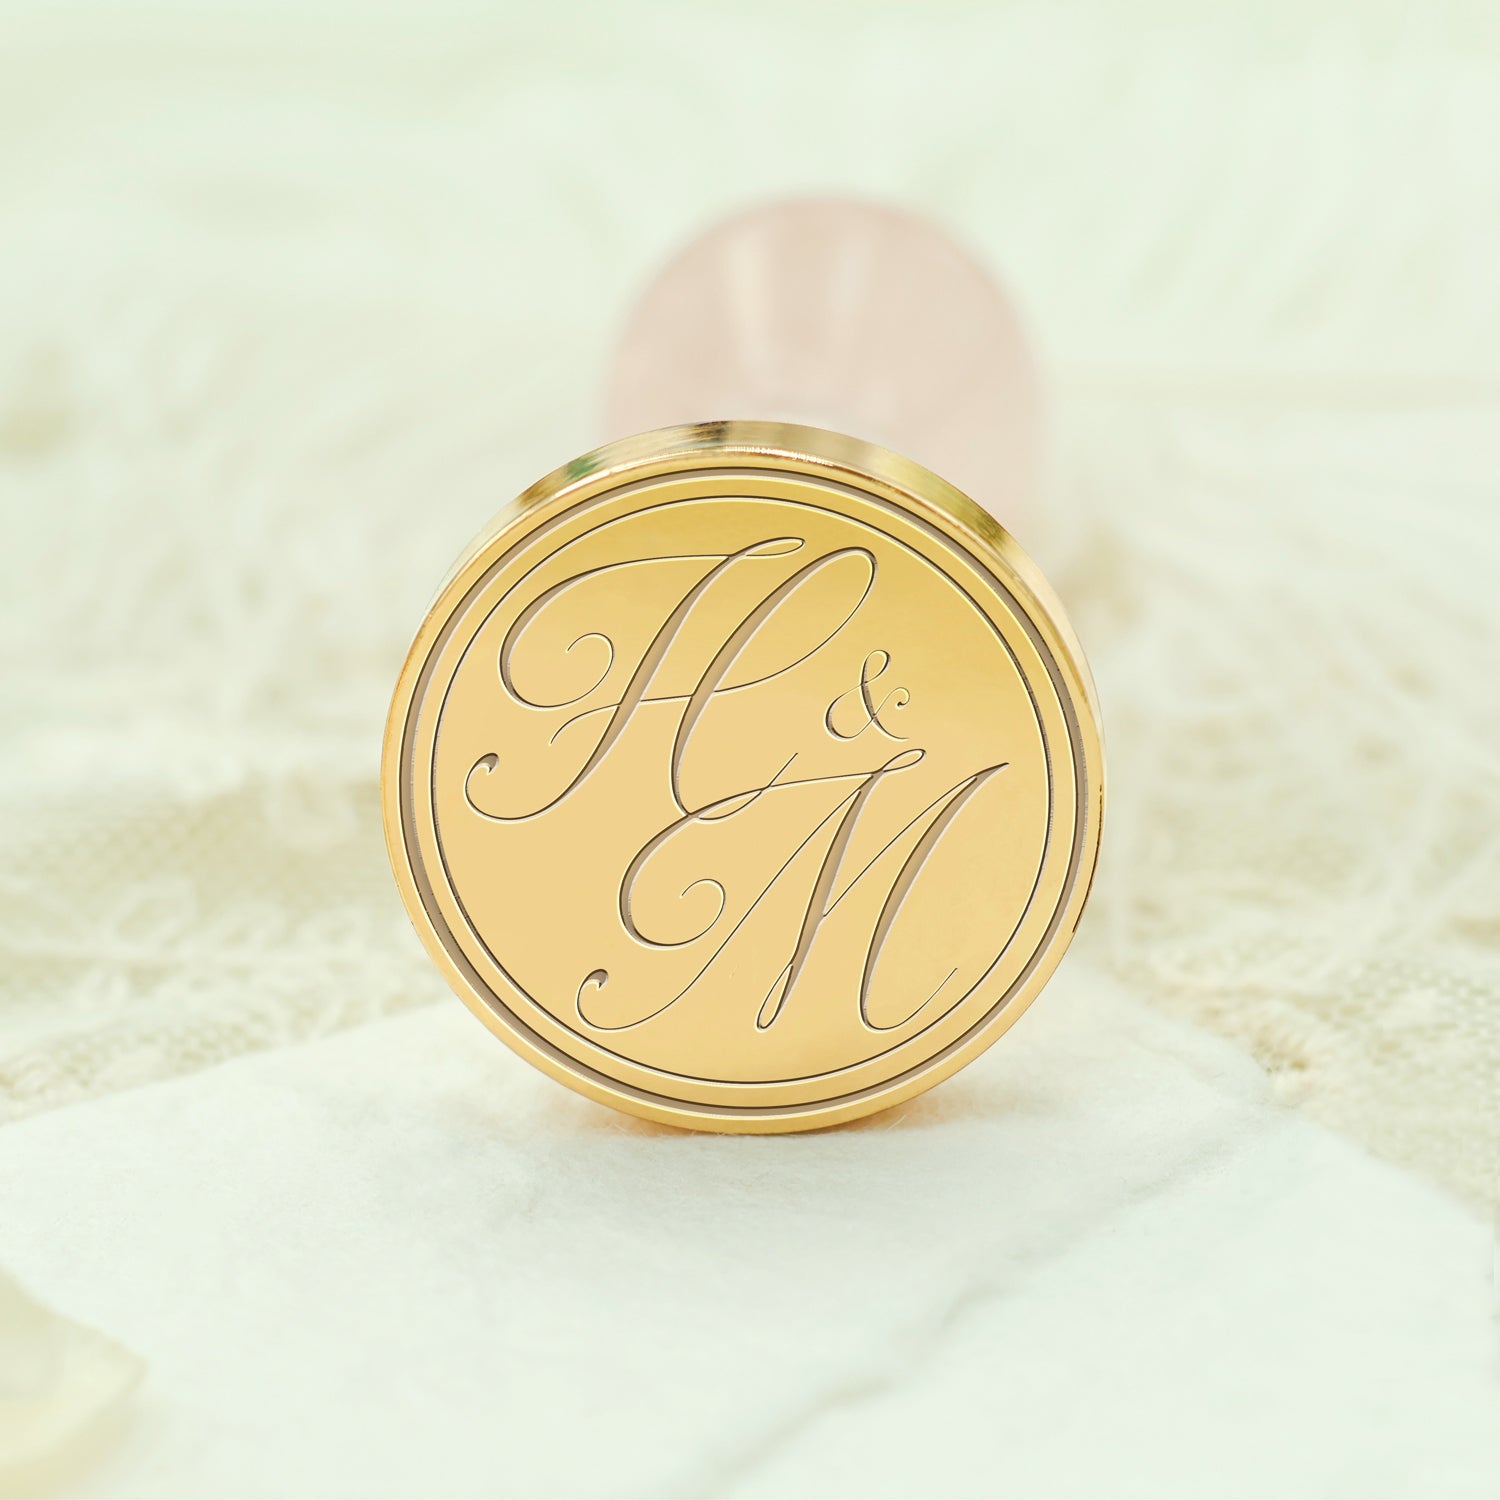 Elegant Gold Wax & Seal for Wedding Invitations - Pre-Made